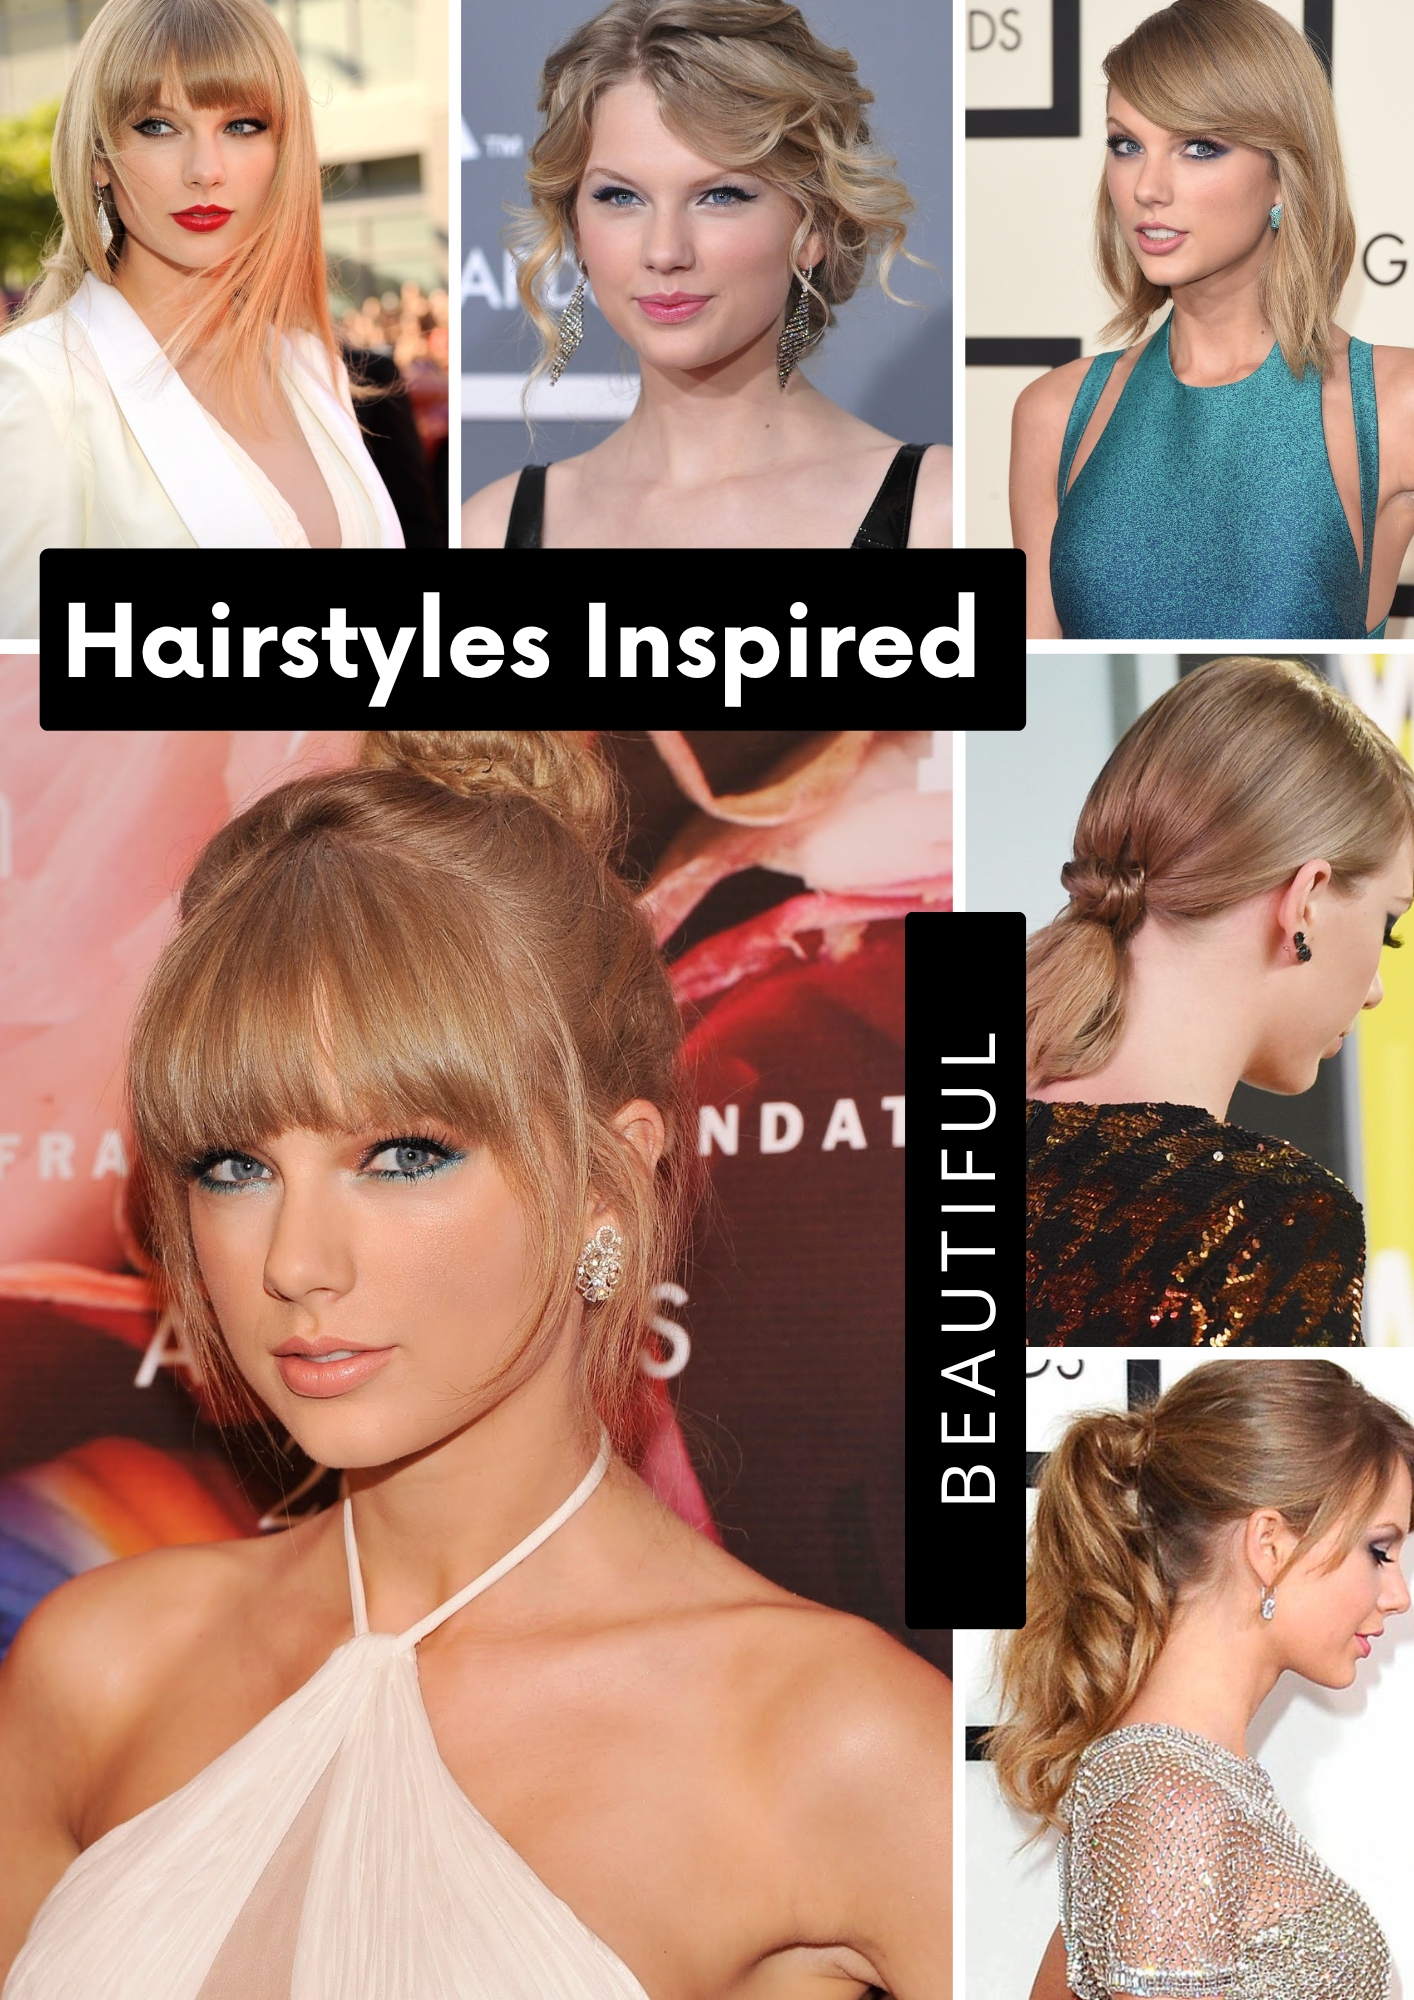 Taylor Swift's hairstyles